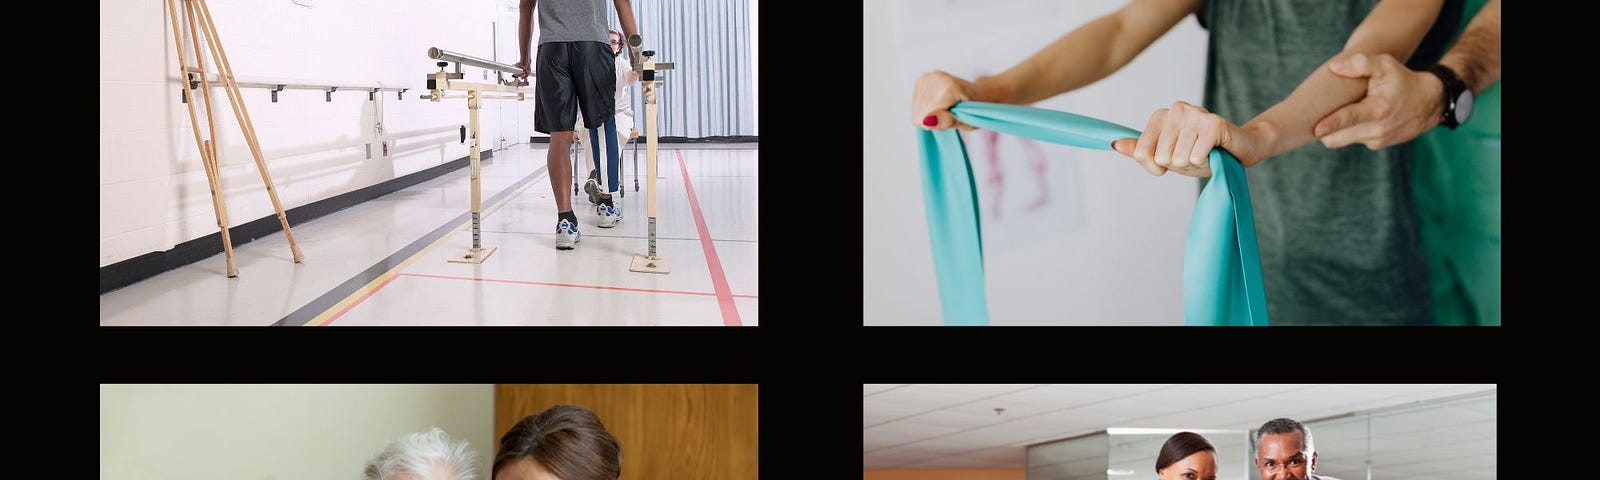 Four images of people in physical rehab. A man walks between parallel bars. A woman exercises with theraband, therapists asist a woman writing and a man walking.